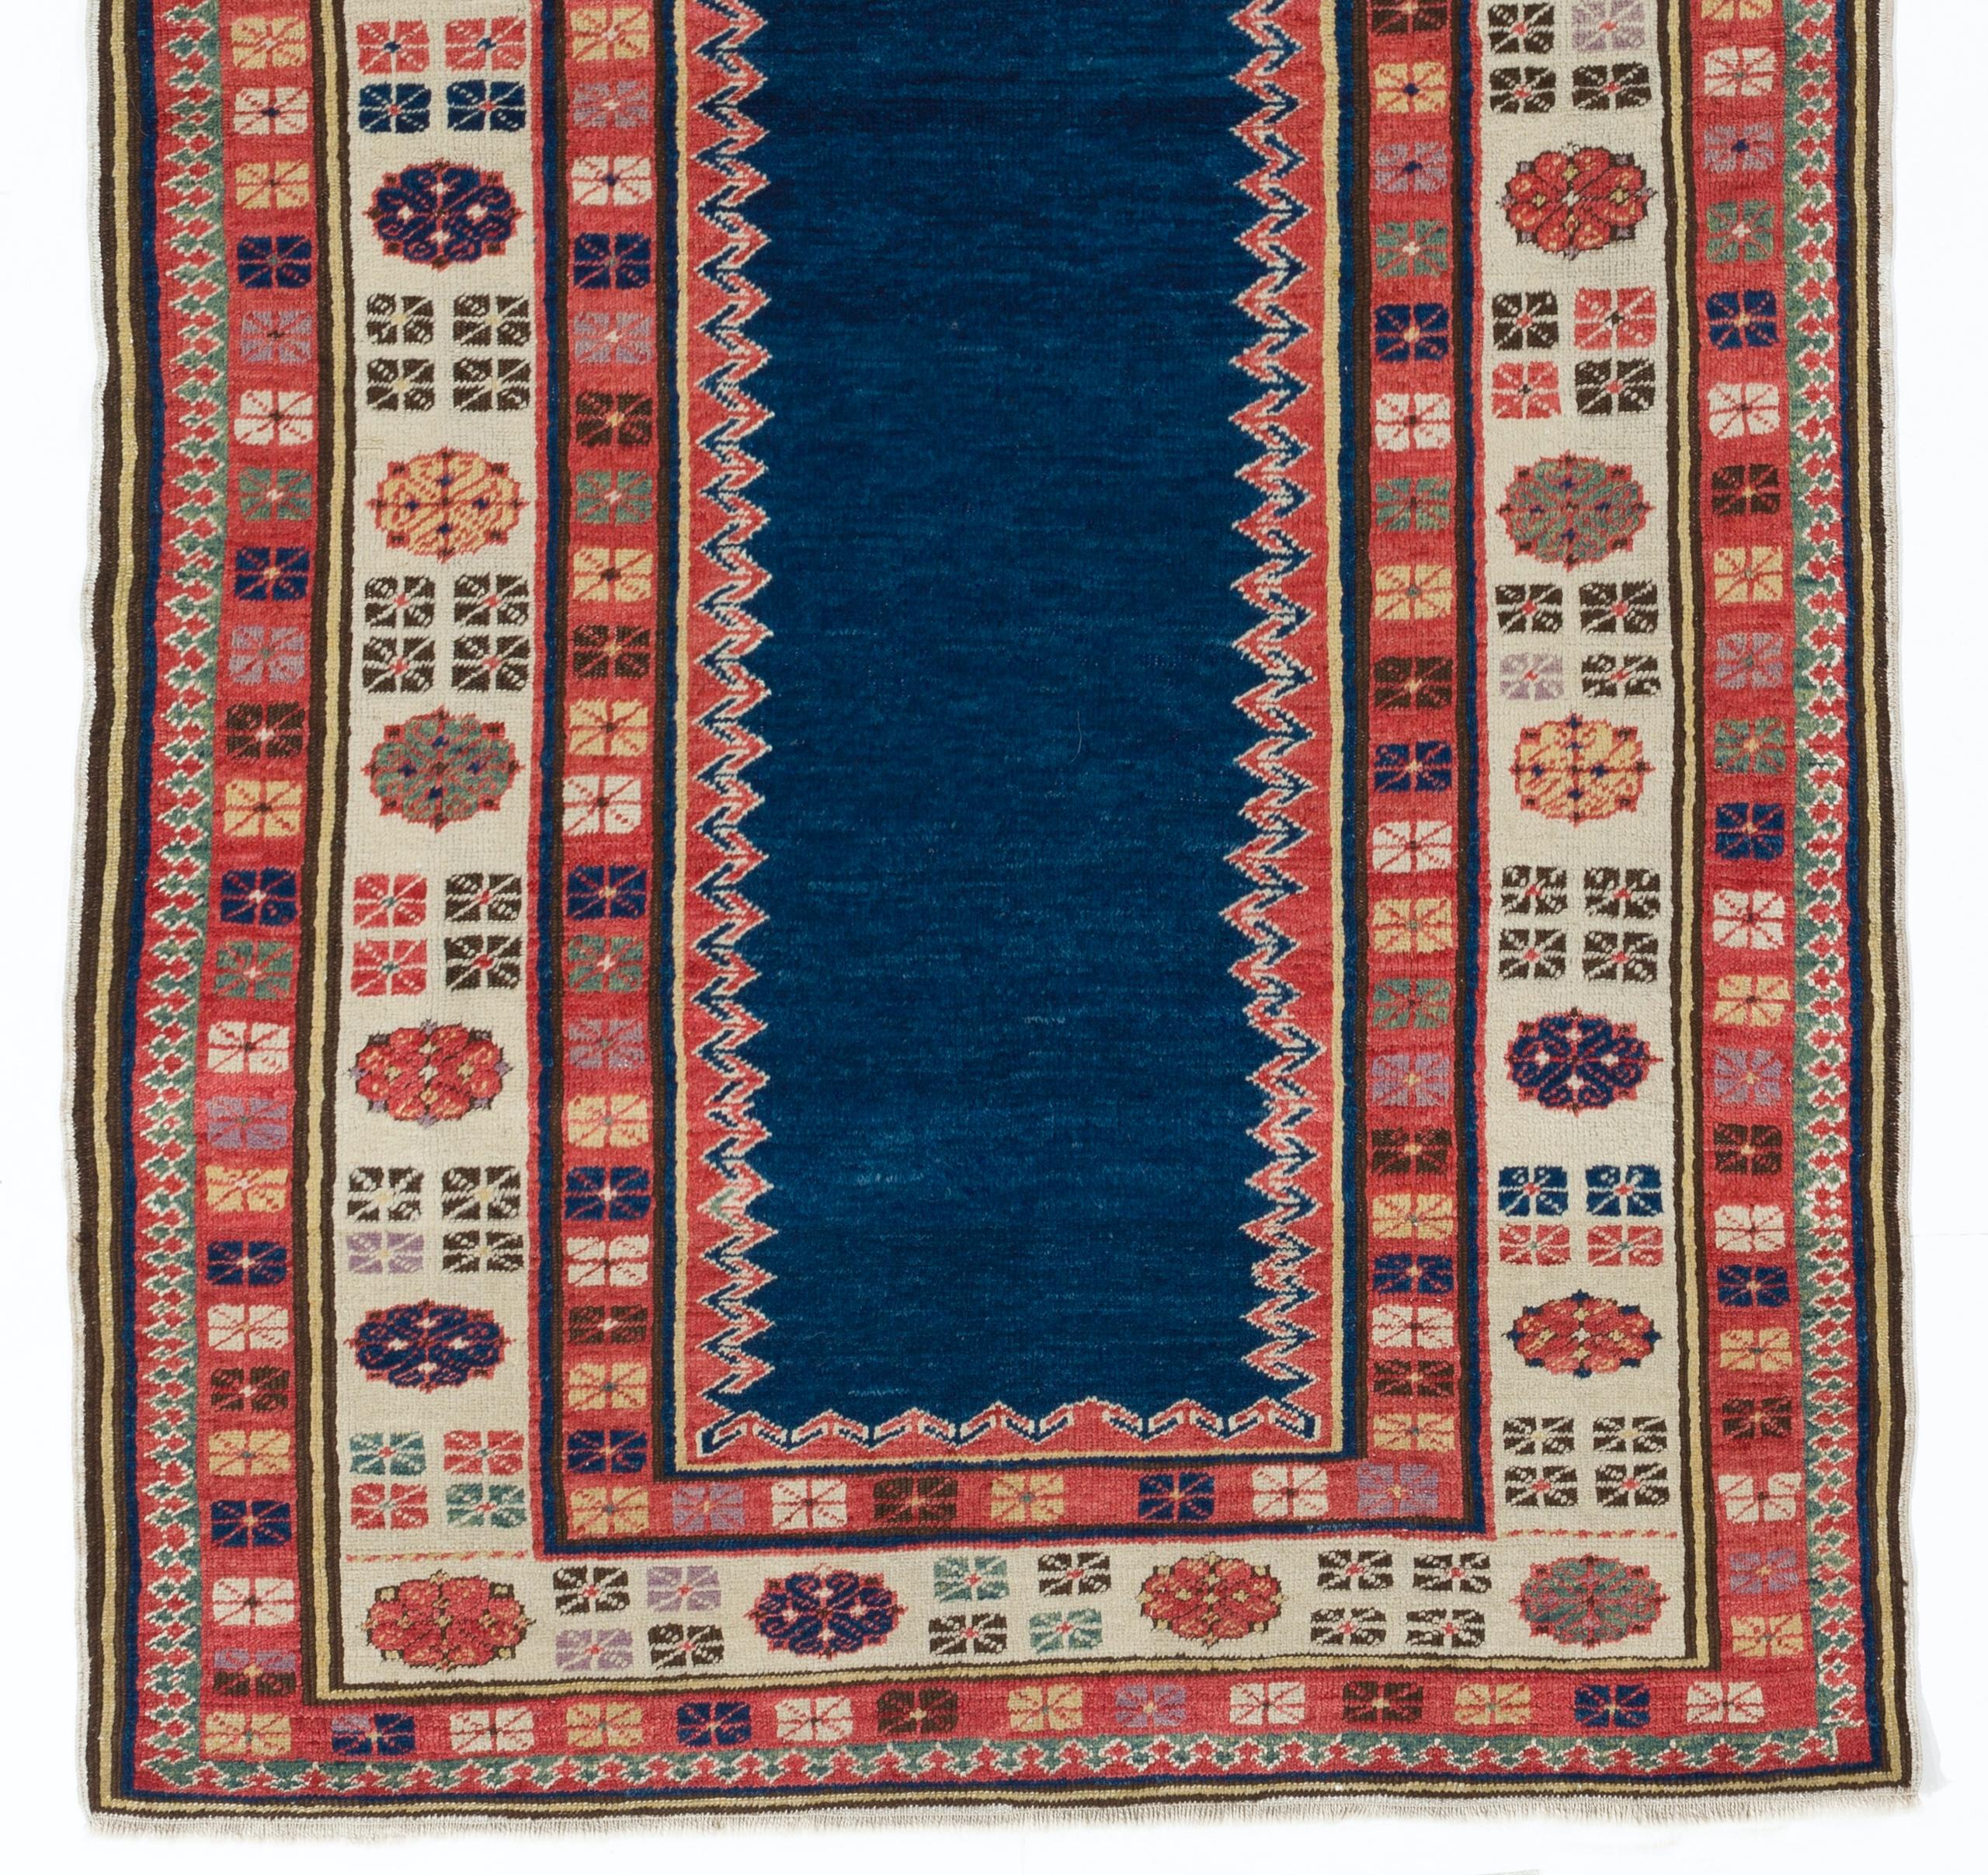 20th Century Vintage Hand-Knotted Caucasian Talish Rug, 100% Wool and Natural Dyes